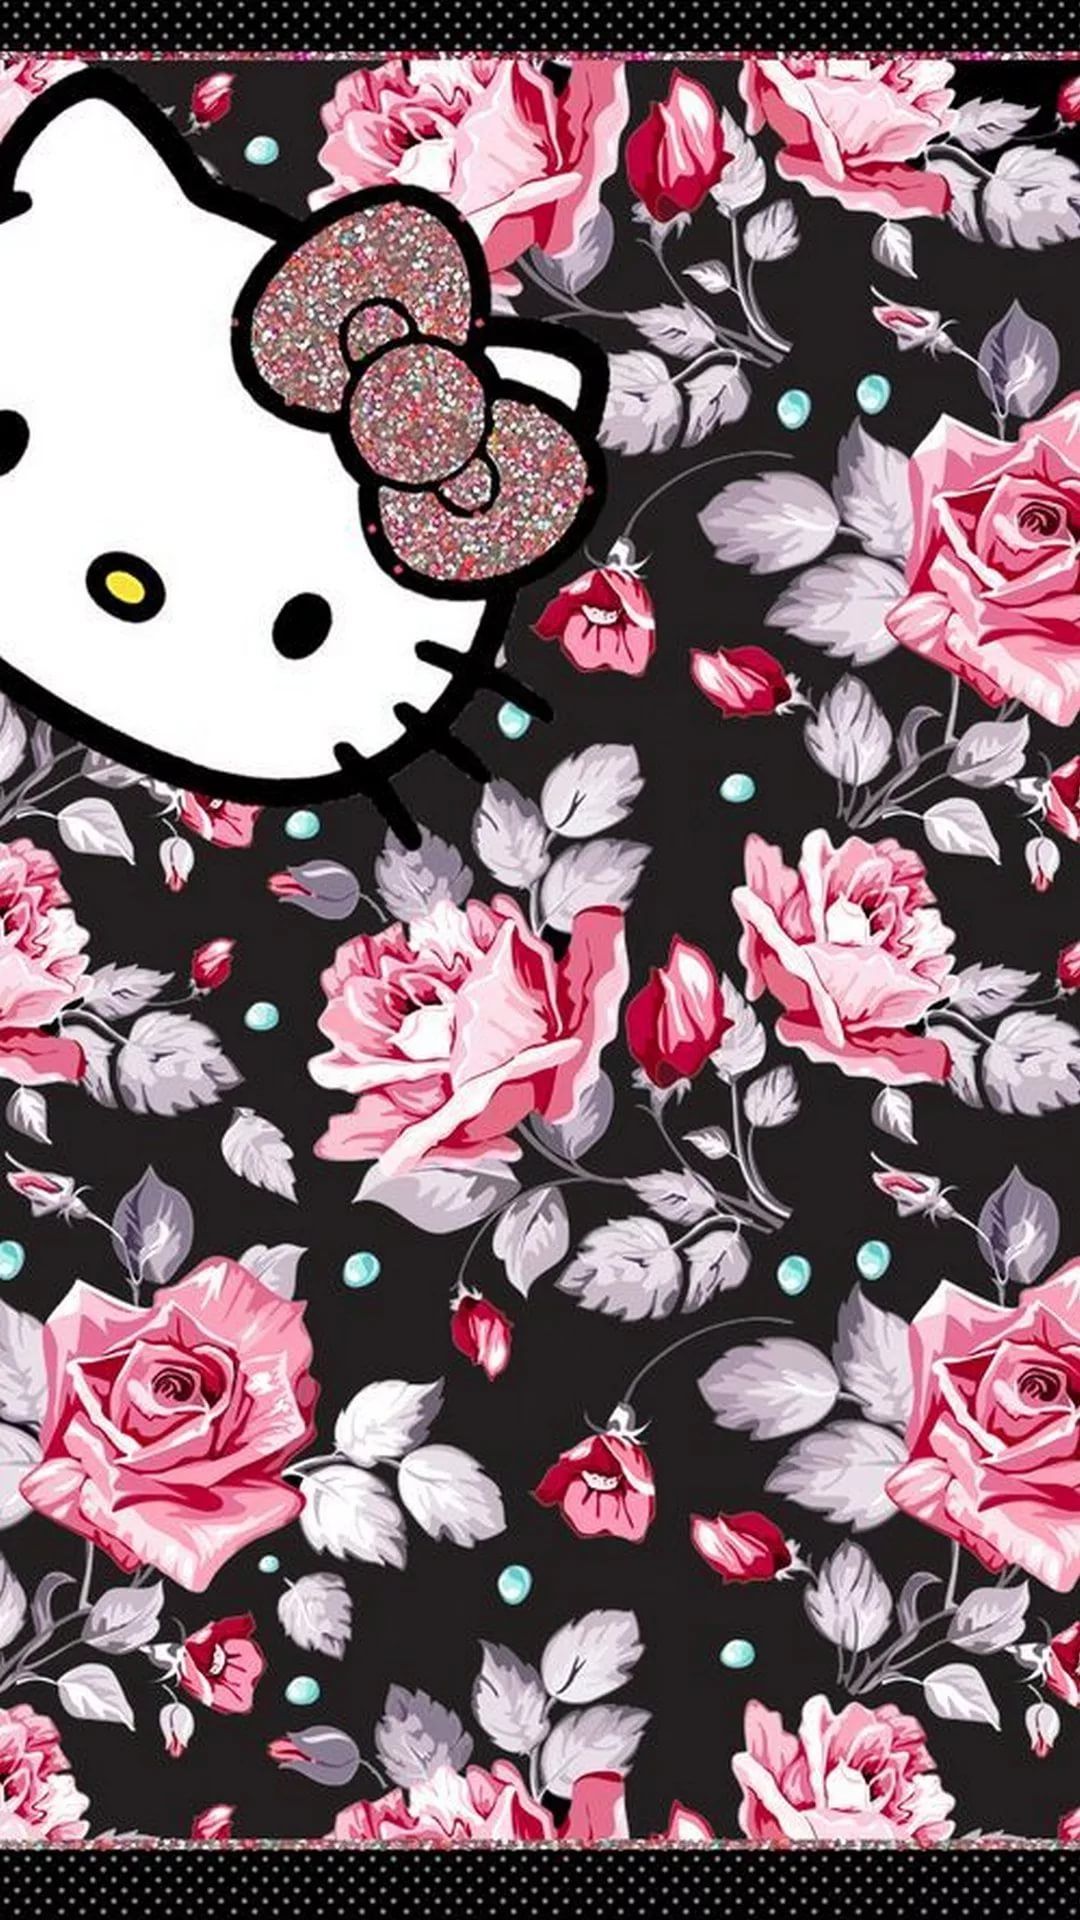 Cute Hello Kitty Cell Phone wallpaper for android